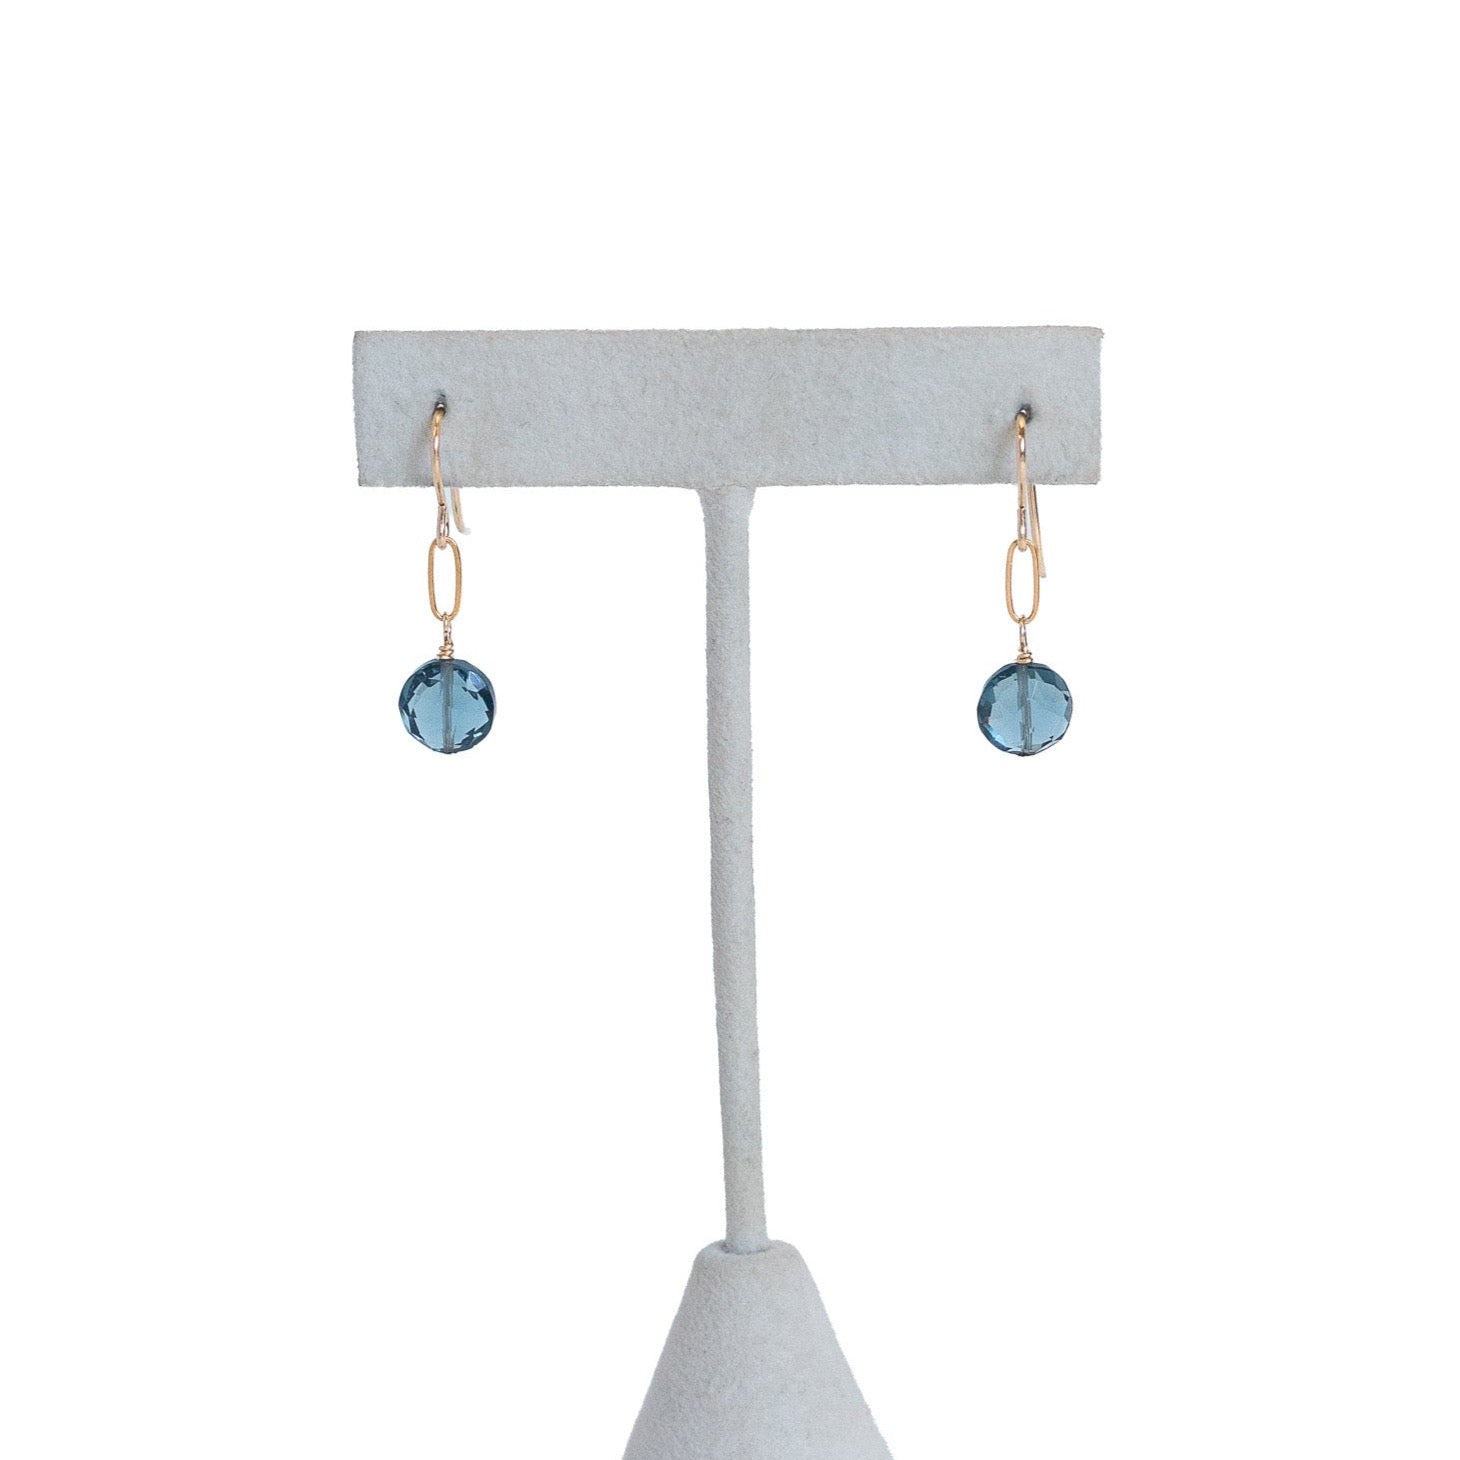 tiny dangle earrings with one gold filled paperclip chain link and one blue crystal on the bottom. 